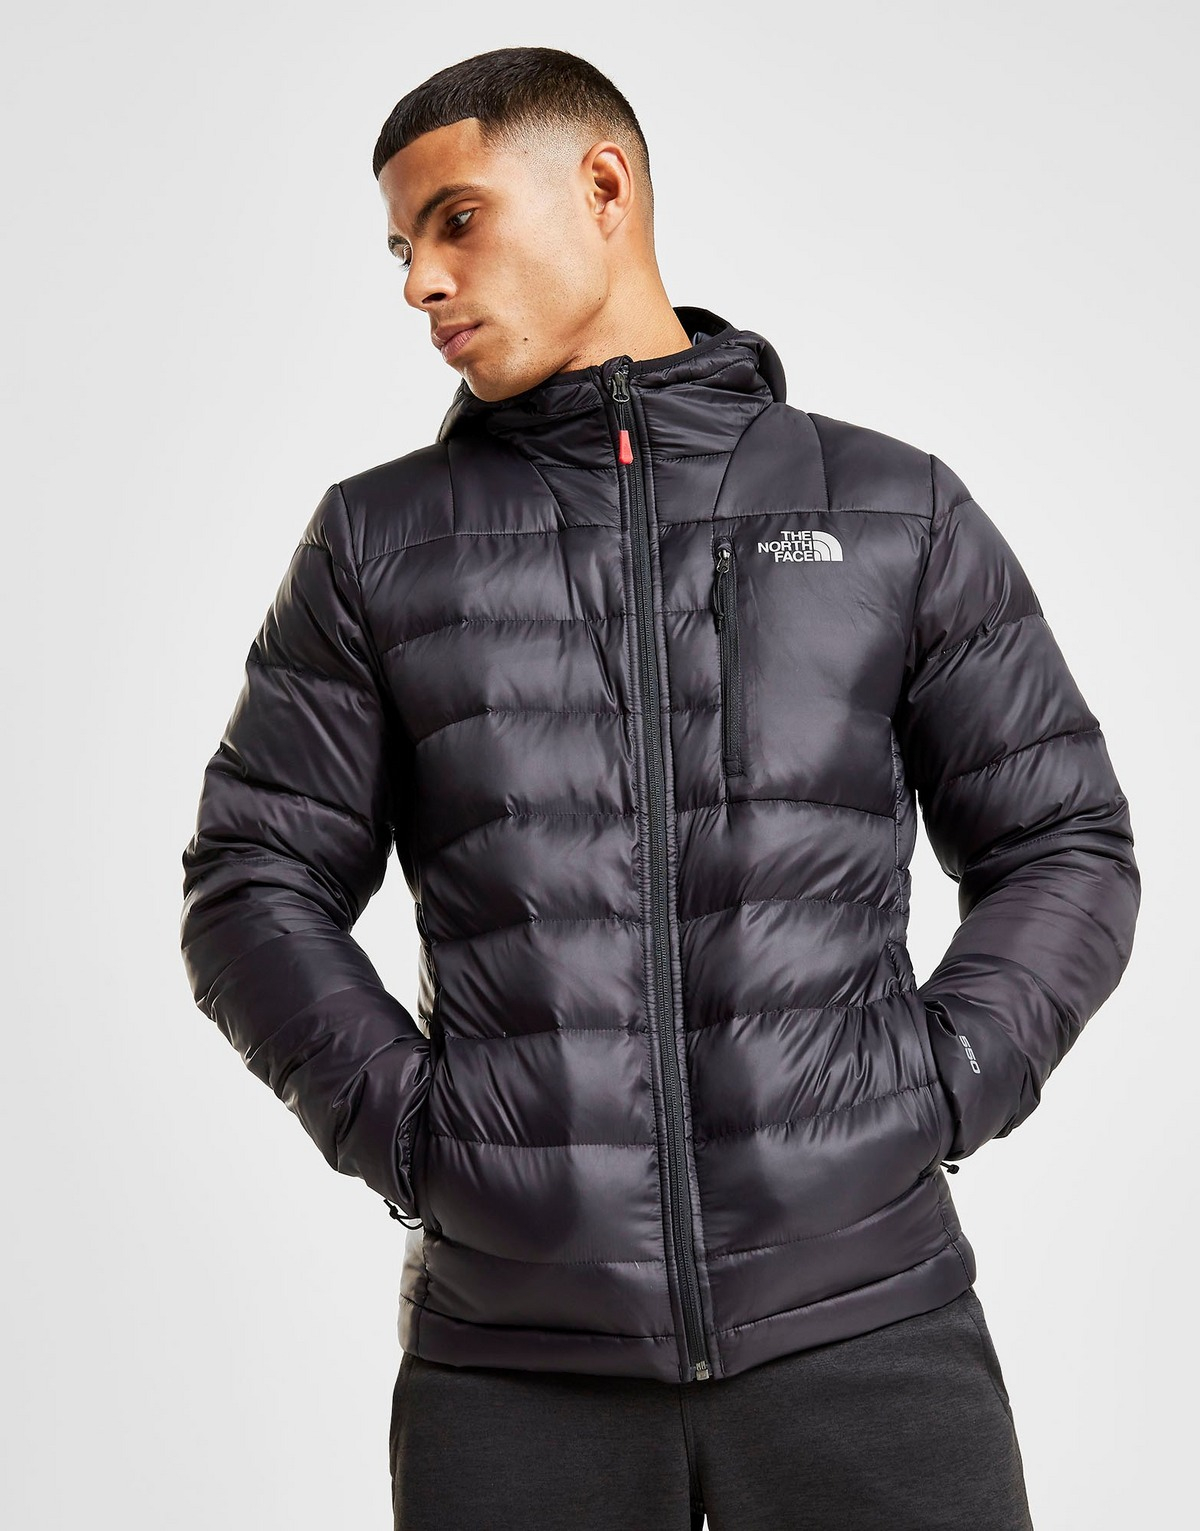 The North Face The North Face Aconcagua Jacket £55 @ JD Sports - hotukdeals